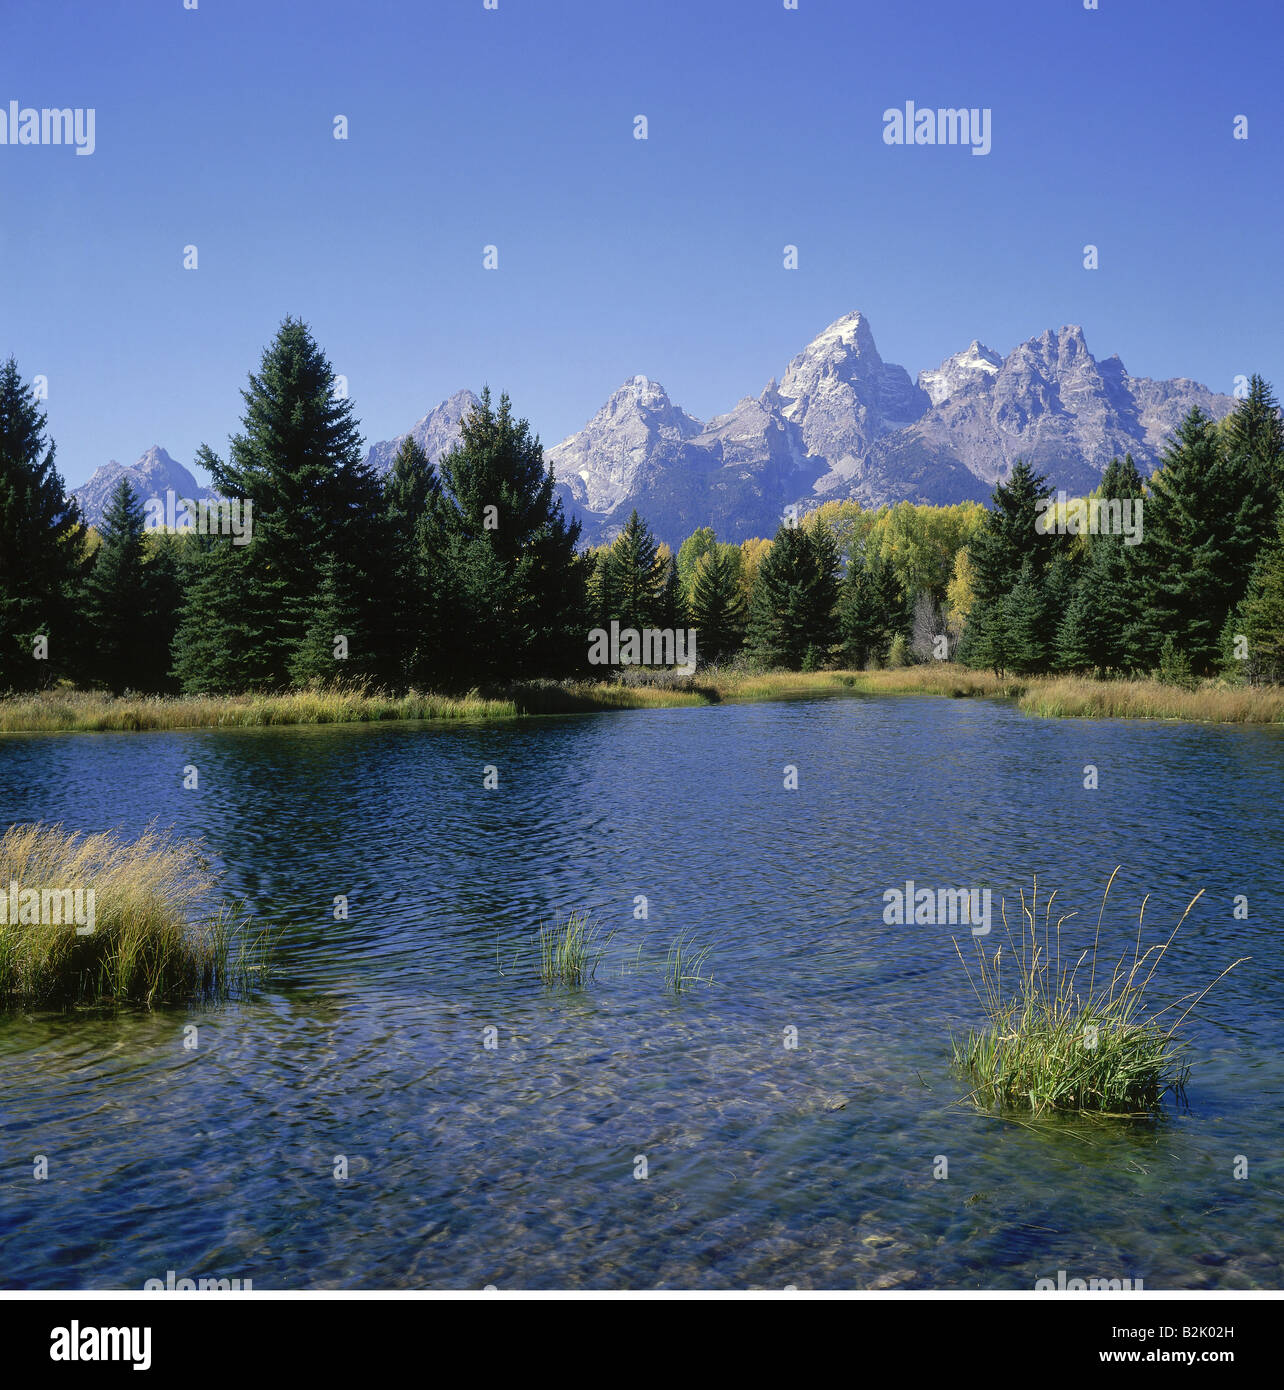 Géographie / voyages, USA, Wyoming, paysages, Grand Teton National Park, la rivière Snake, atterrissage Schwabacher et Grand Teton, Additional-Rights Clearance-Info-Gamme-Not-Available Banque D'Images